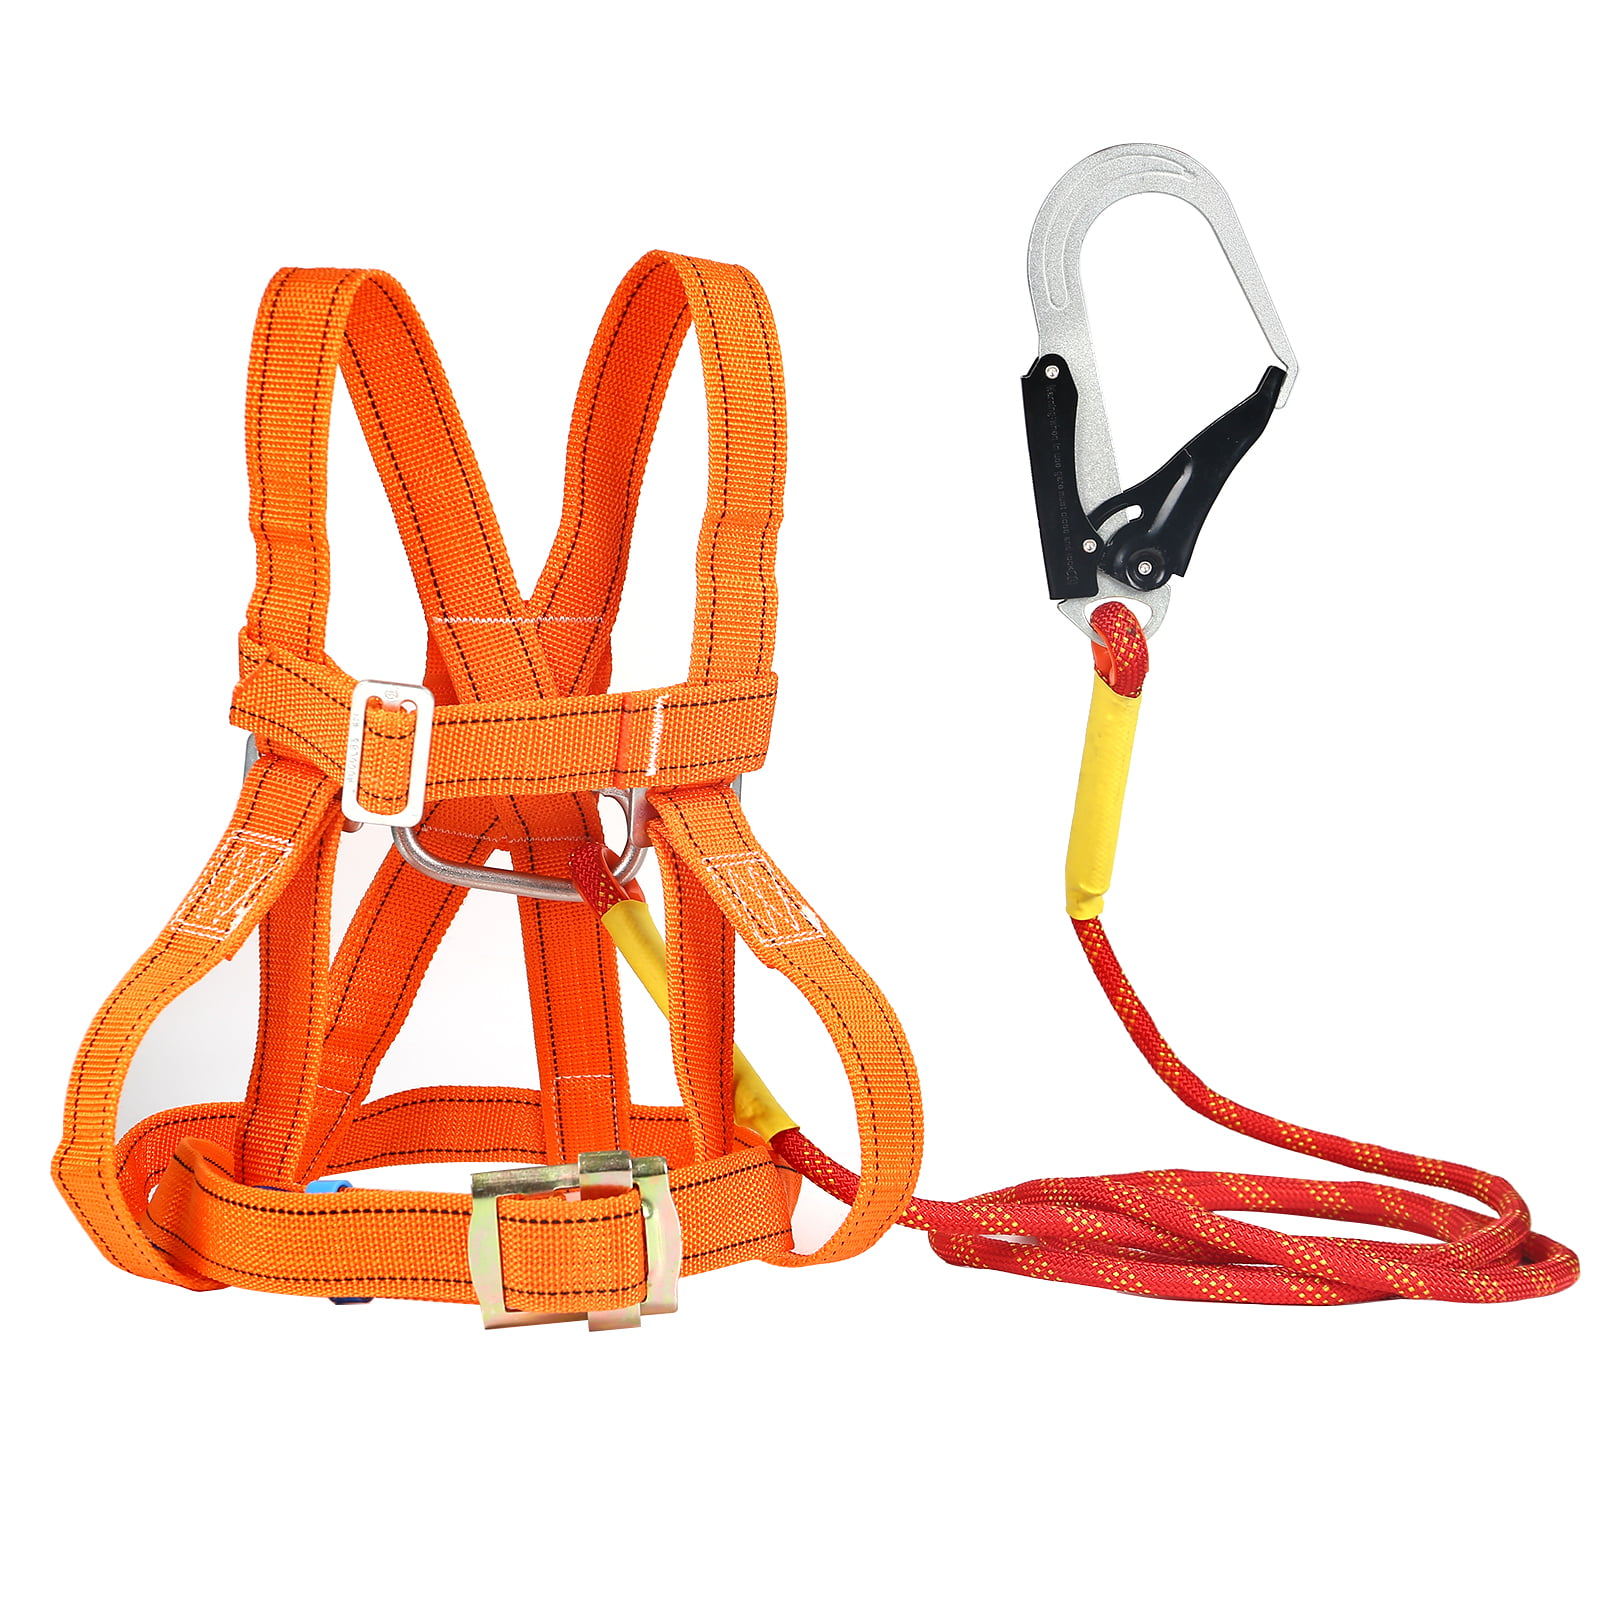 SAFETY RATED KARABINERS  SAFETY HARNESSES TREE SURGEONS SCAFFOLDING CLIMBING 